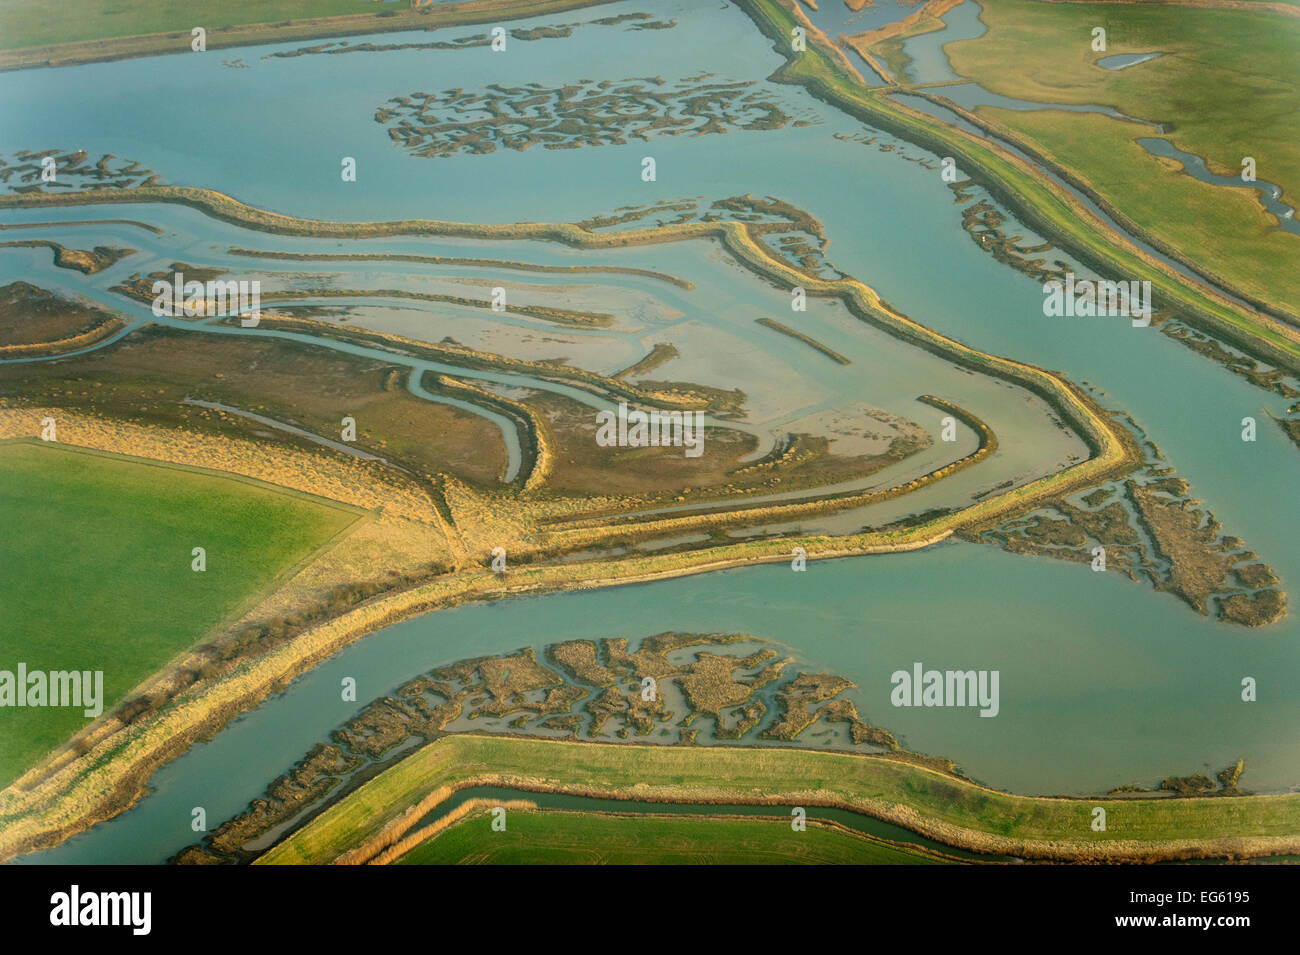 Remnant saltmarsh and coastal realignment at Abbotts Hall Farm, Essex, UK, March 2012. Did you know? 24% of the English coastline is saltmarsh. Stock Photo